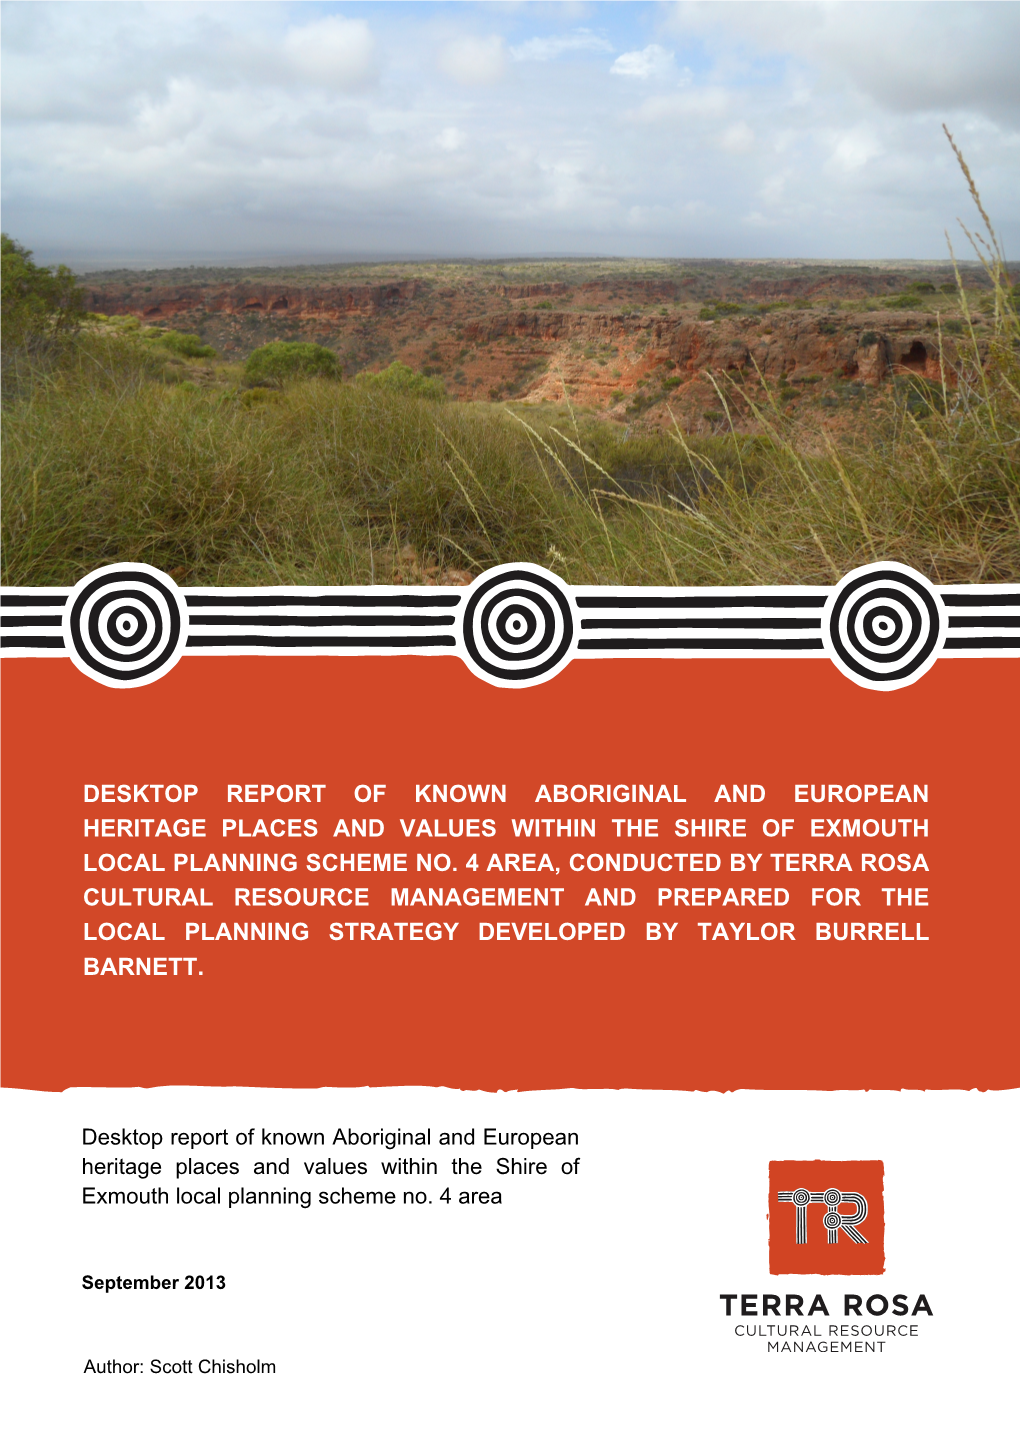 Desktop Report of Known Aboriginal and European Heritage Places and Values Within the Shire of Exmouth Local Planning Scheme No